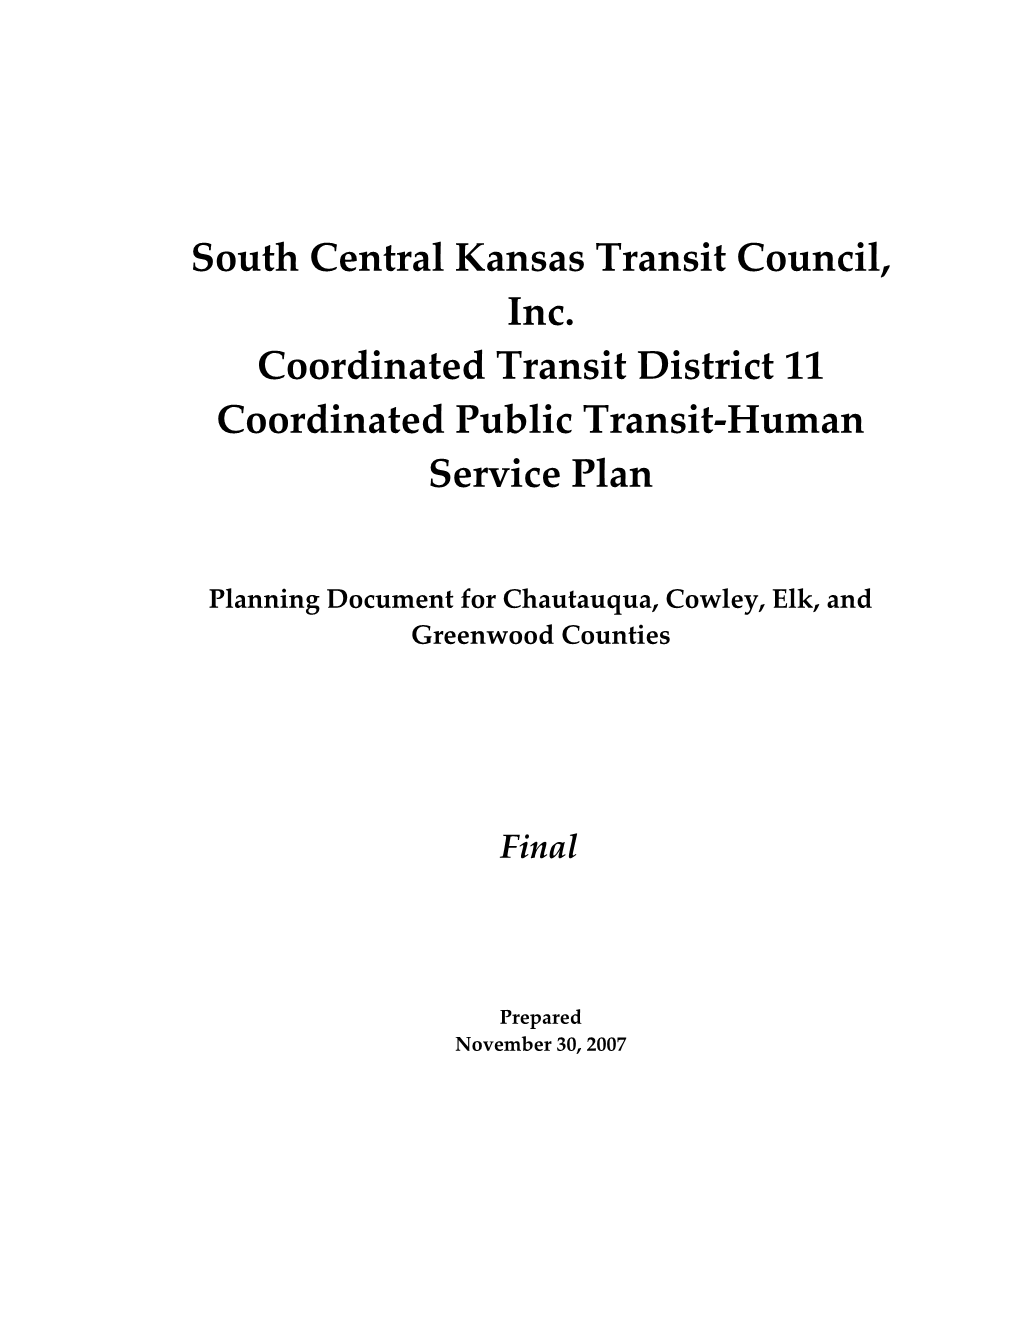 In Kansas, There Are 15 Coordinated Transit Districts (Ctds)